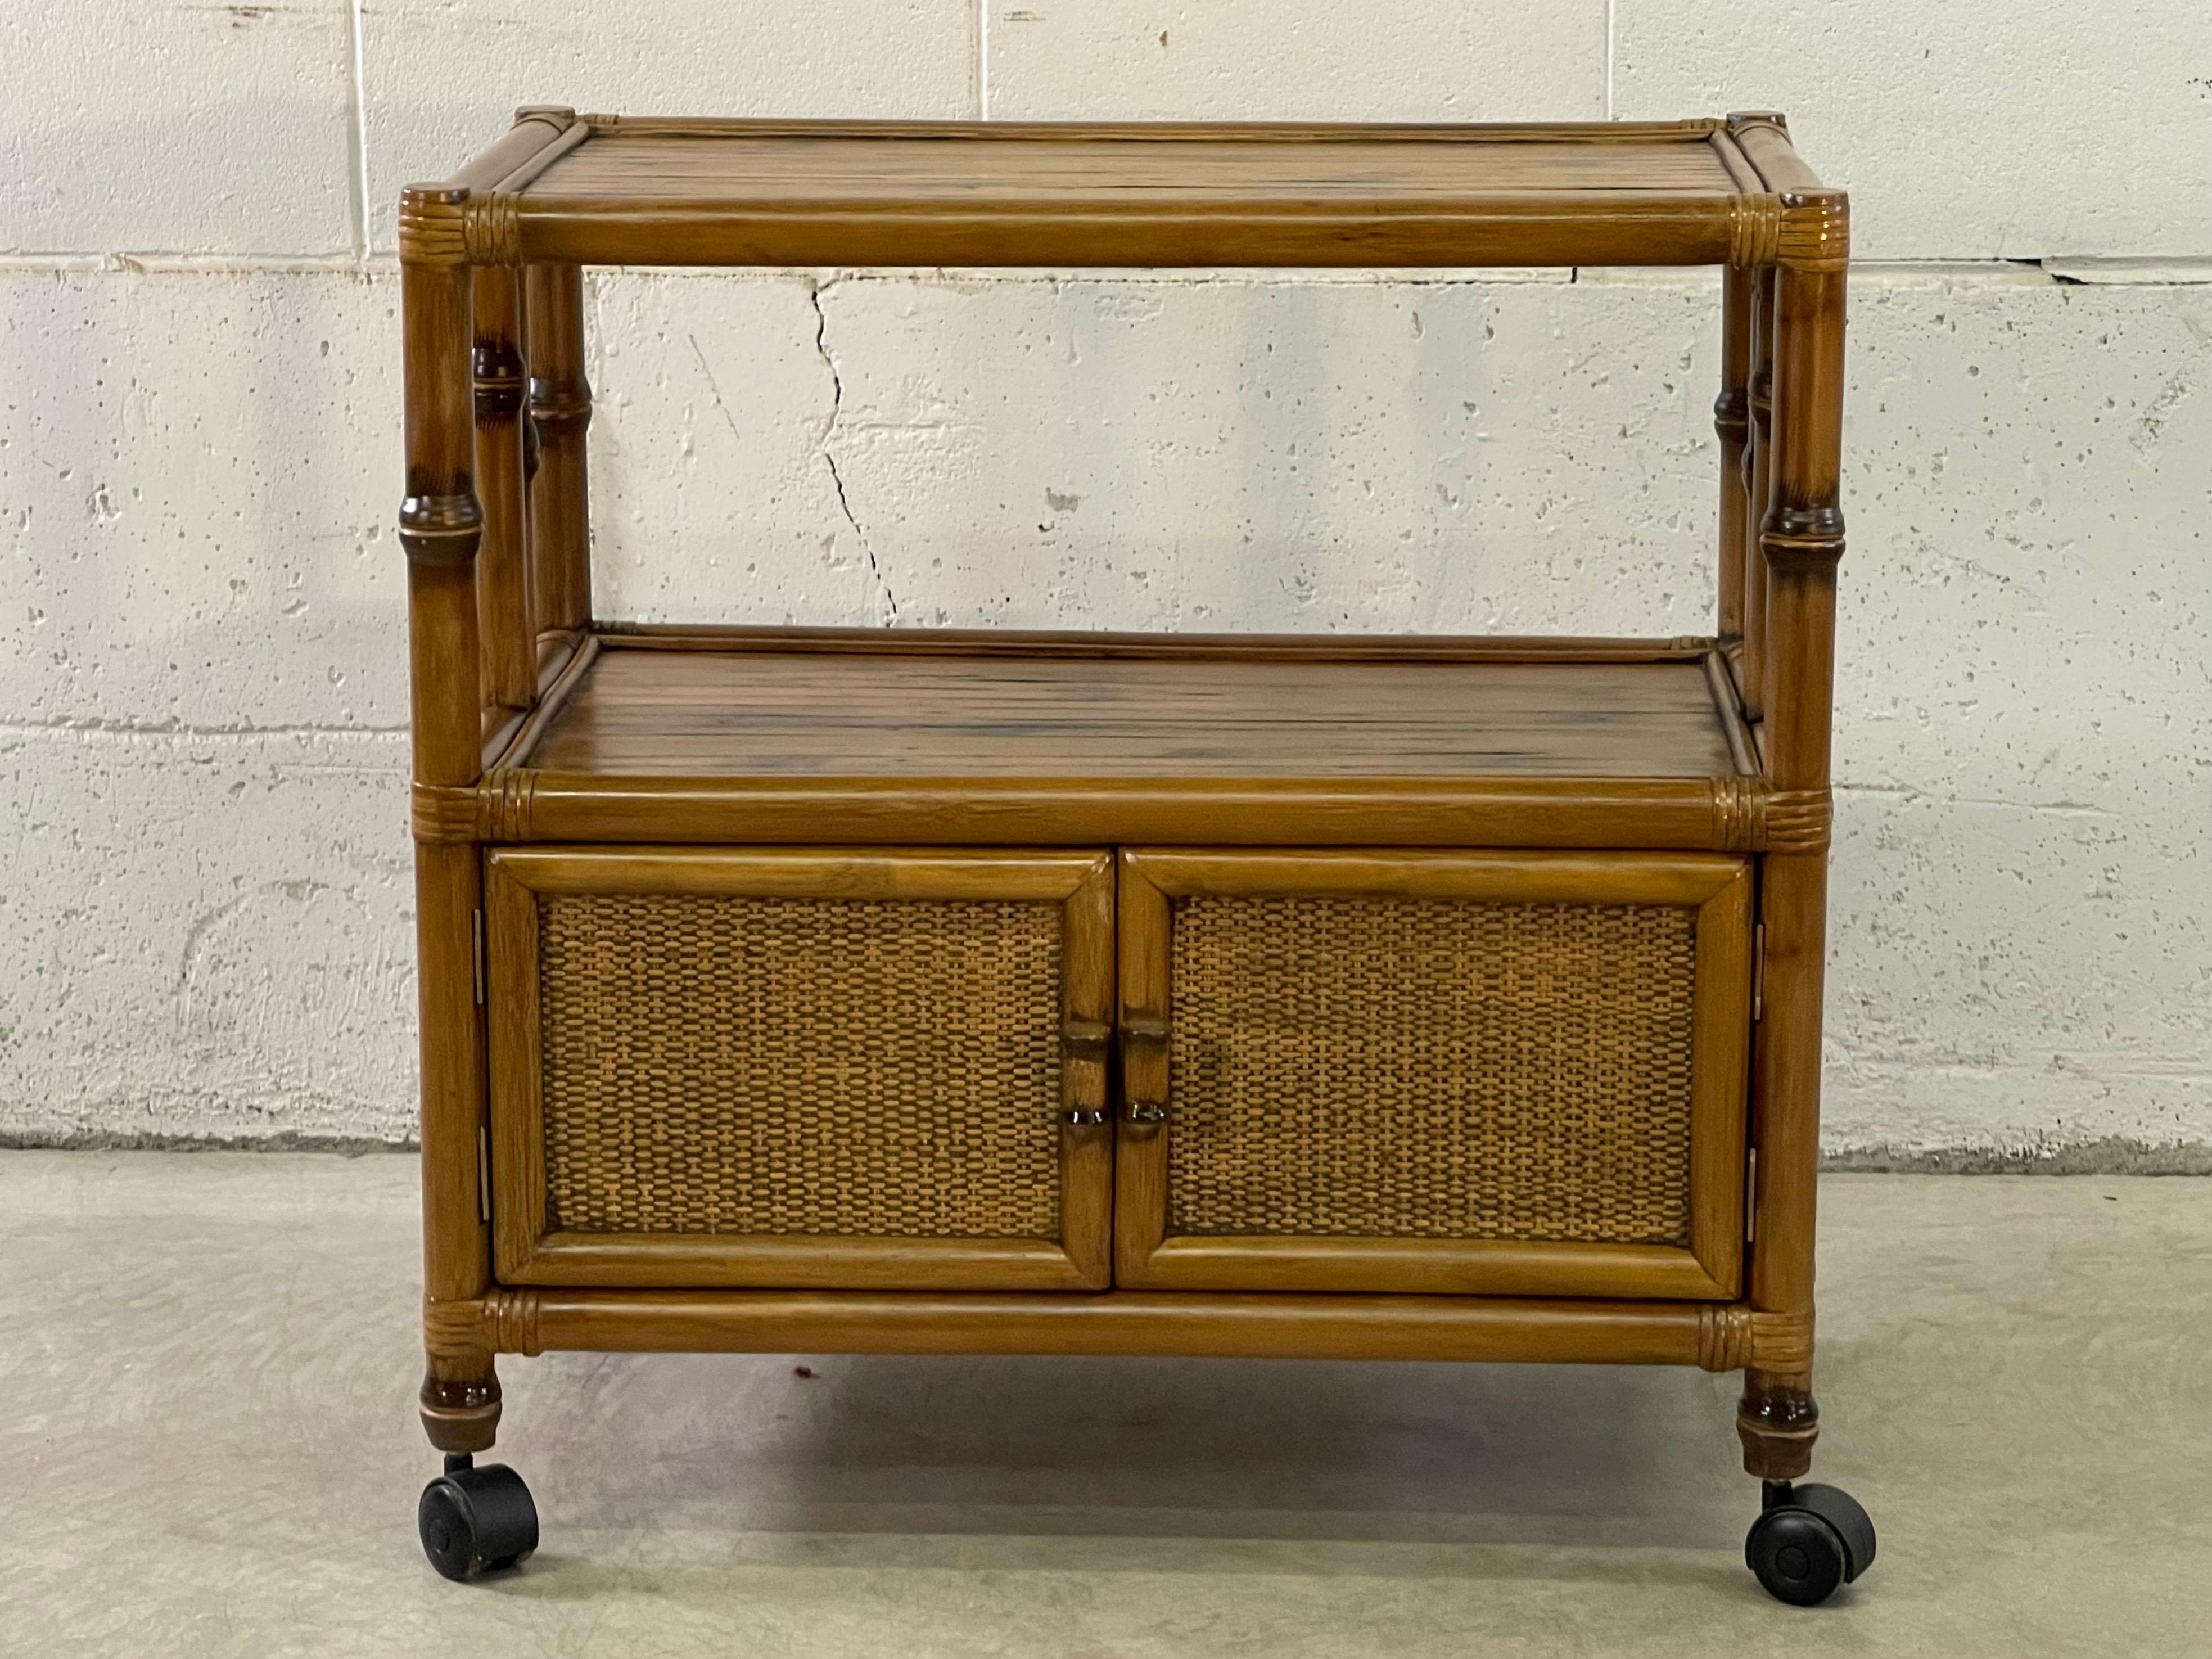 Vintage 1970s rattan rolling serving cart with additional storage. The cart has two shelves and additional space to store on the bottom. The rattan has burnt accents all over the cart.